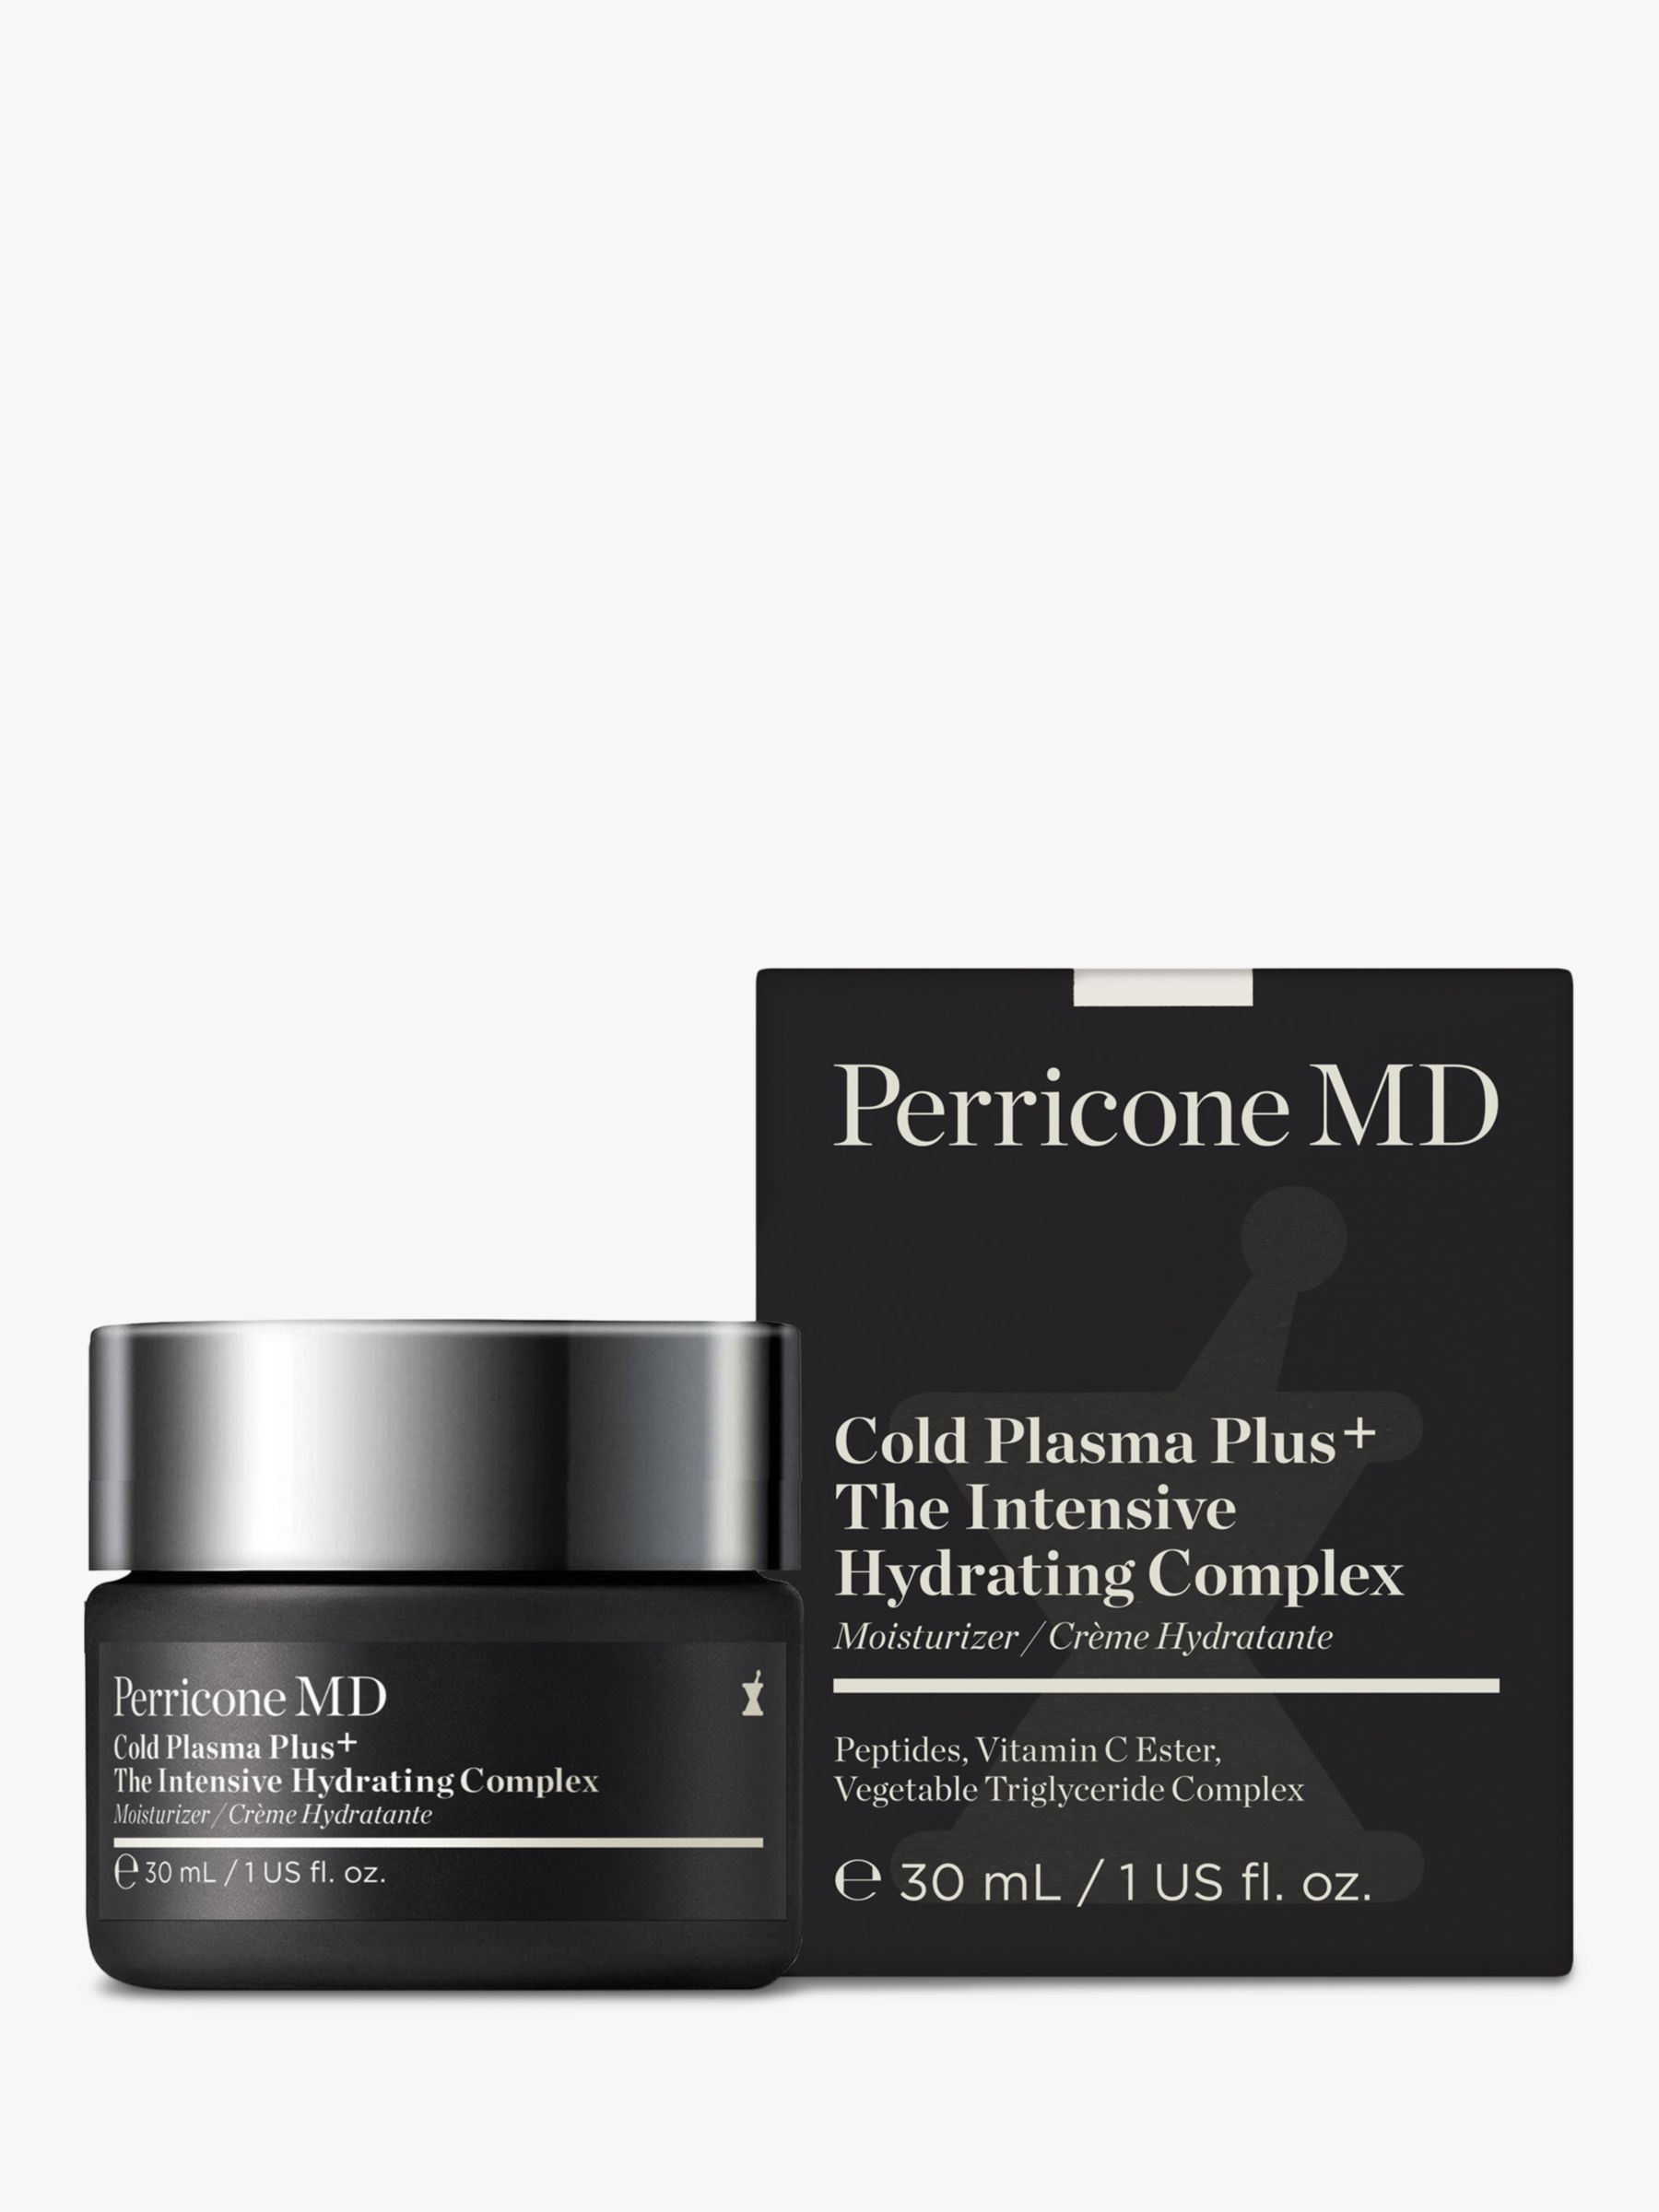 Perricone MD Cold Plasma Plus+ The Intensive Hydrating Complex, 30ml 1